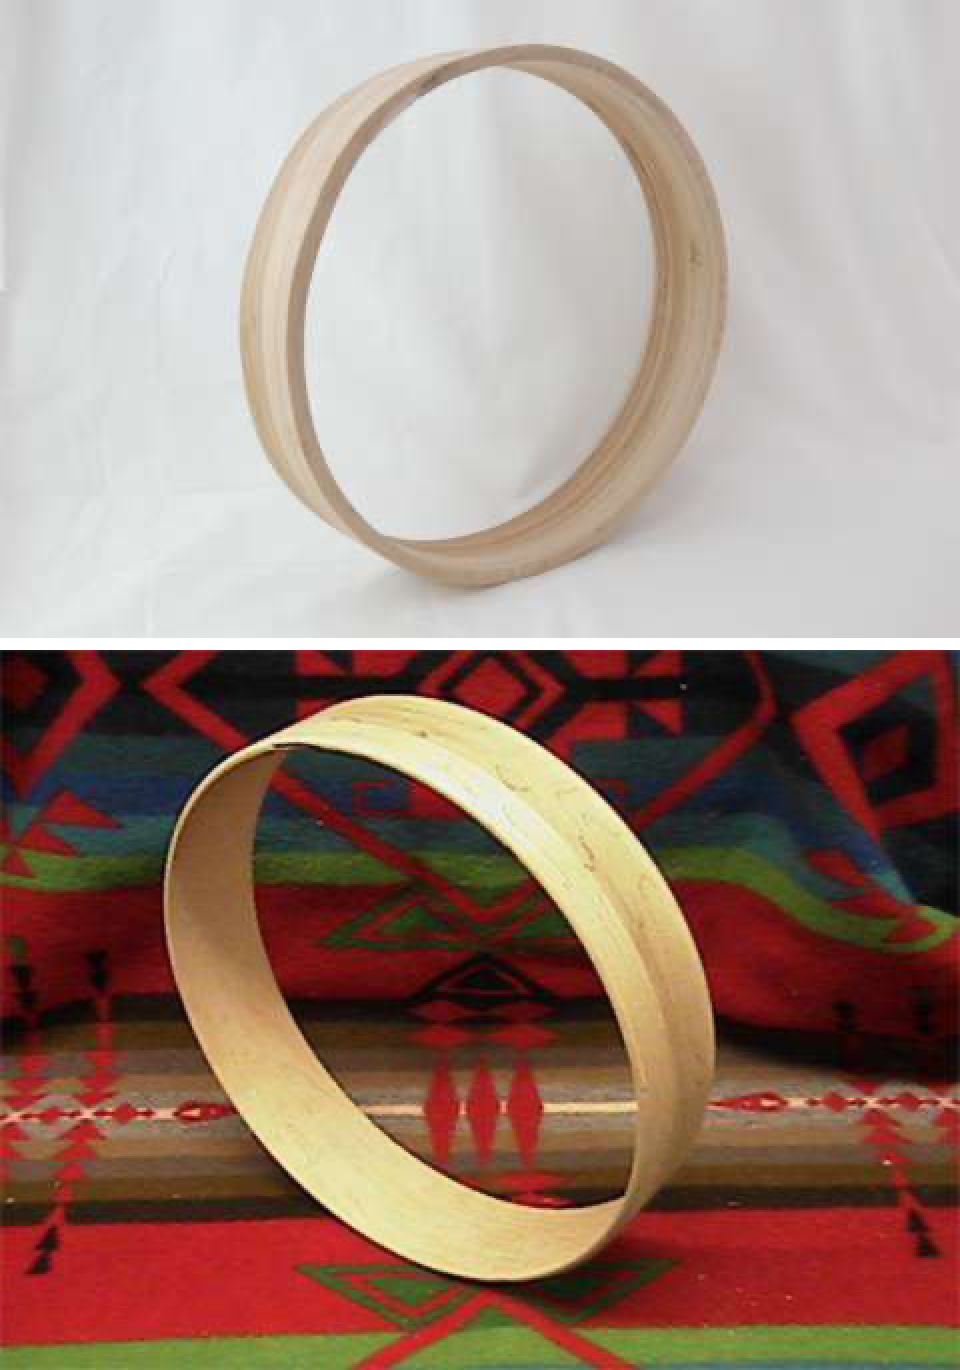 Drum rings are commercially available in various sizes. Furandhide.com, Native American Trading Post.